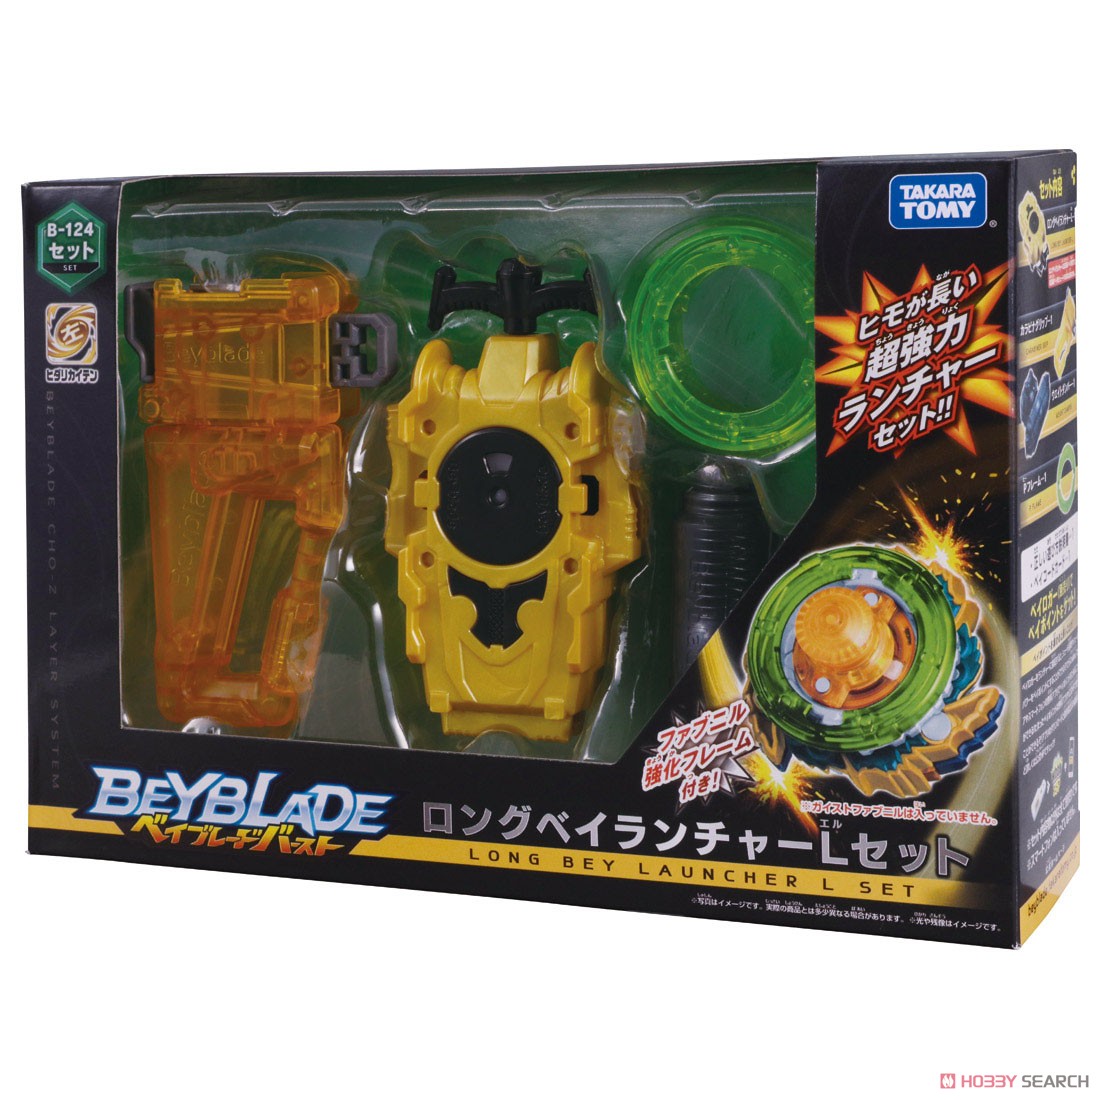 Beyblade Burst B-124 Long Bey Launcher L Set (Active Toy) Package1